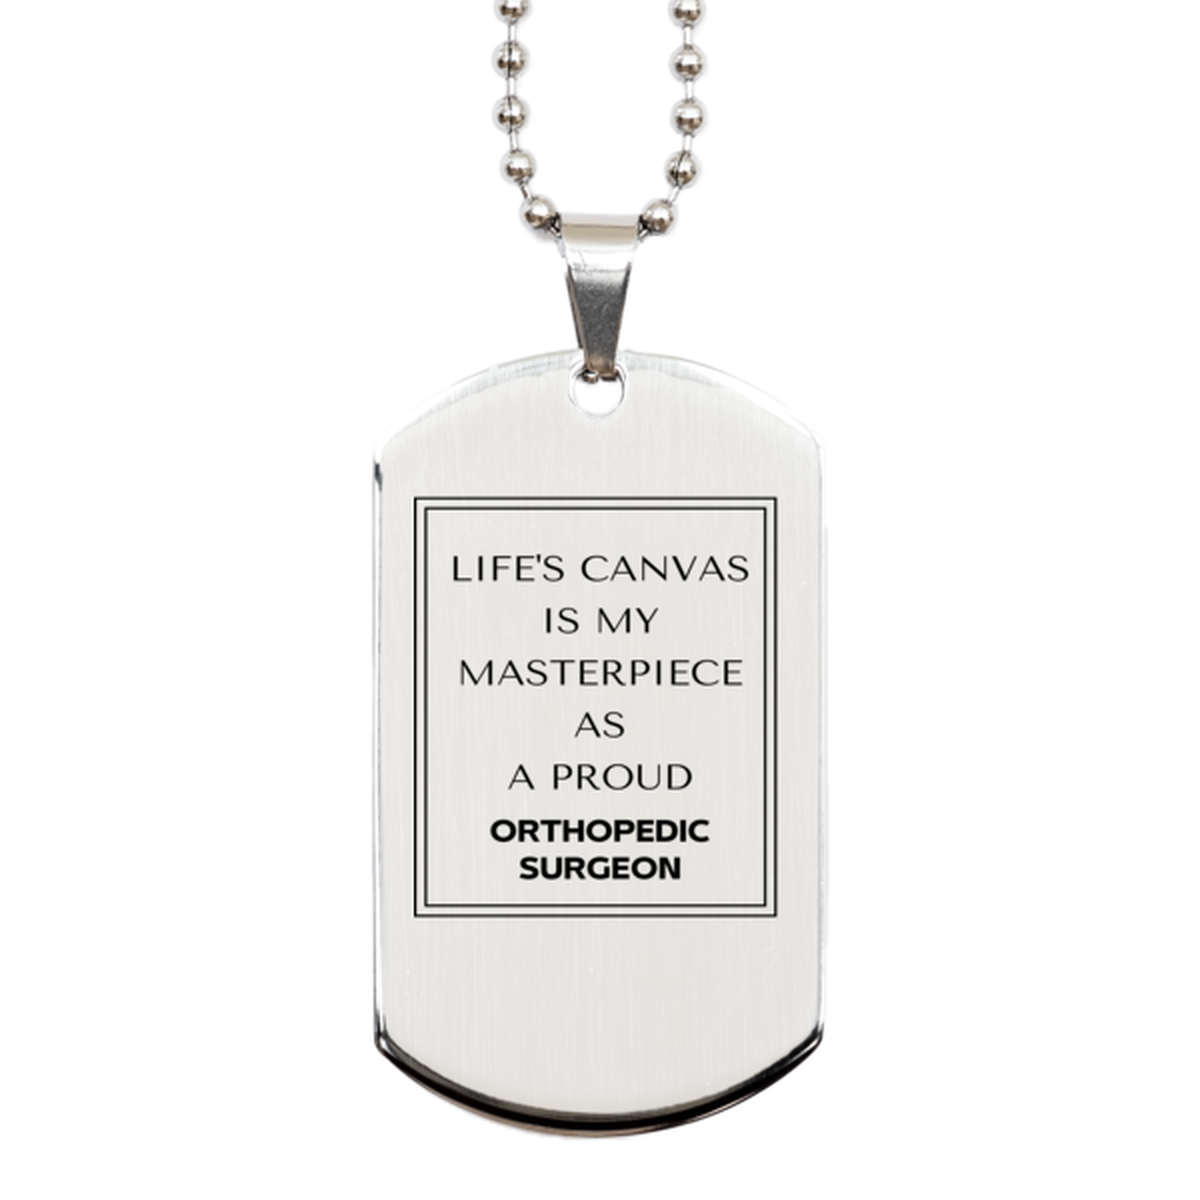 Proud Orthopedic Surgeon Gifts, Life's canvas is my masterpiece, Epic Birthday Christmas Unique Silver Dog Tag For Orthopedic Surgeon, Coworkers, Men, Women, Friends